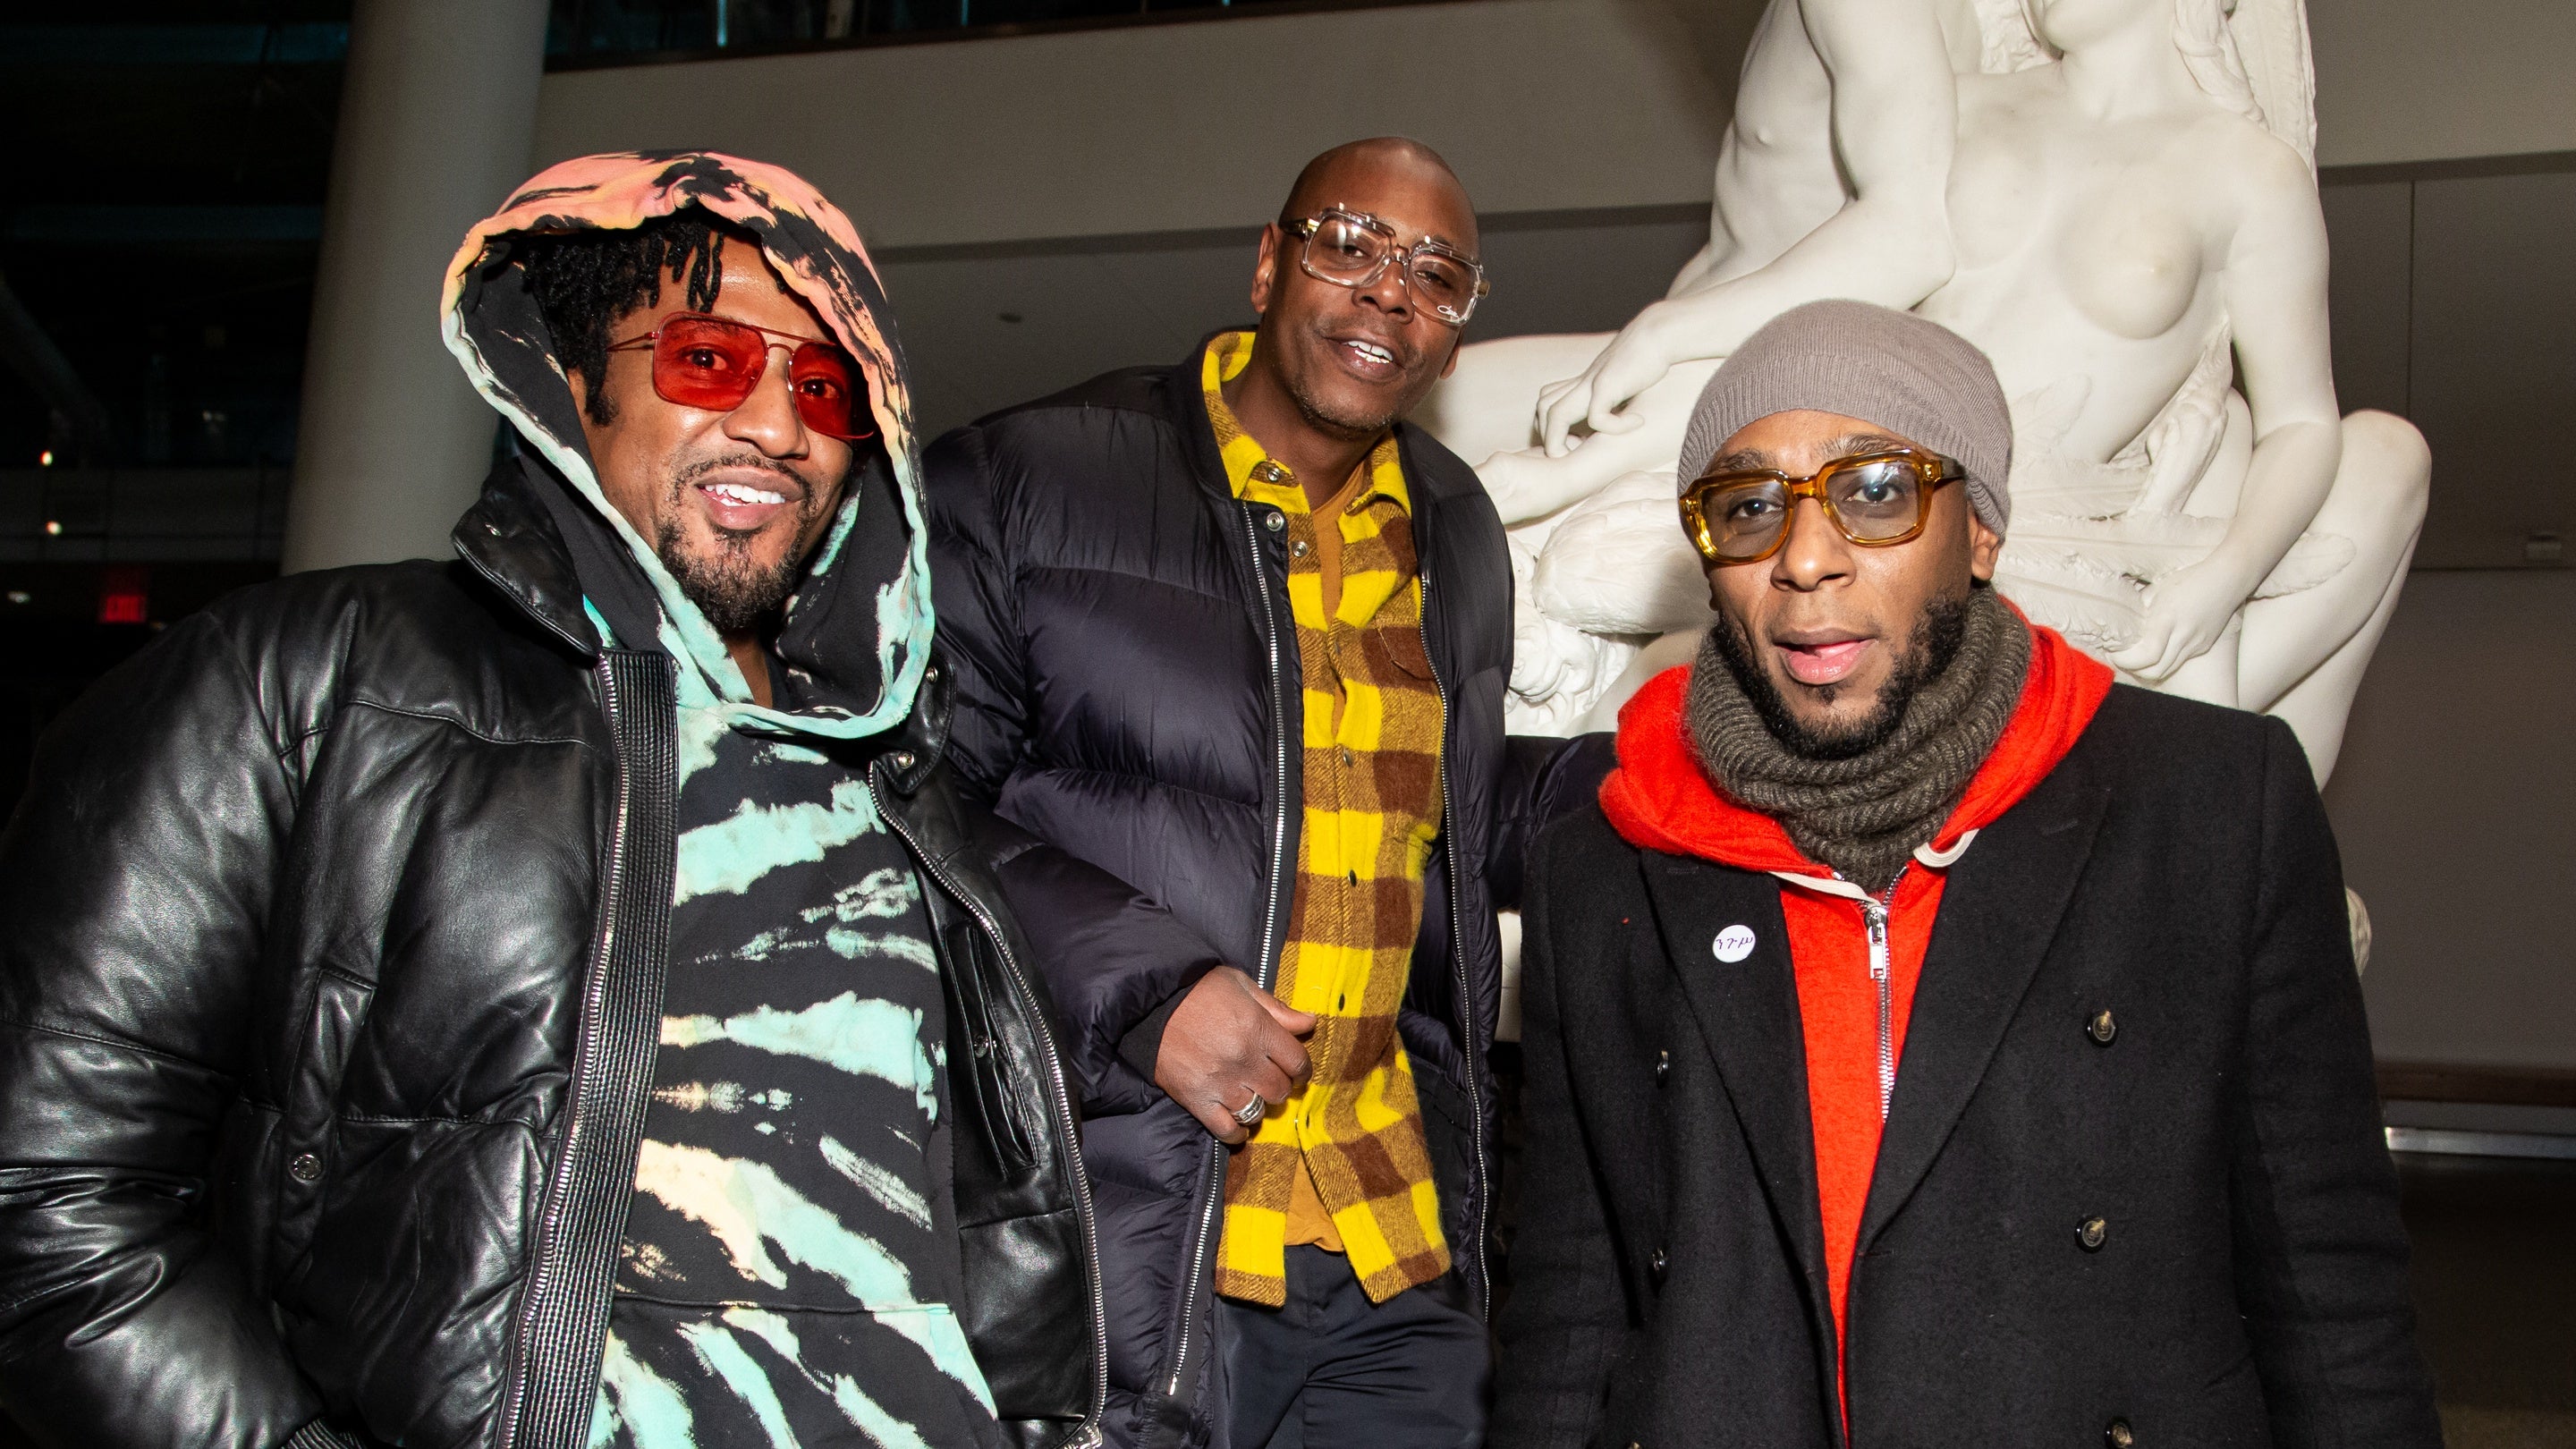 Dave Chappelle, Q-Tip & Brooklyn Show Out for Yasiin Bey's 'Negus' Premiere